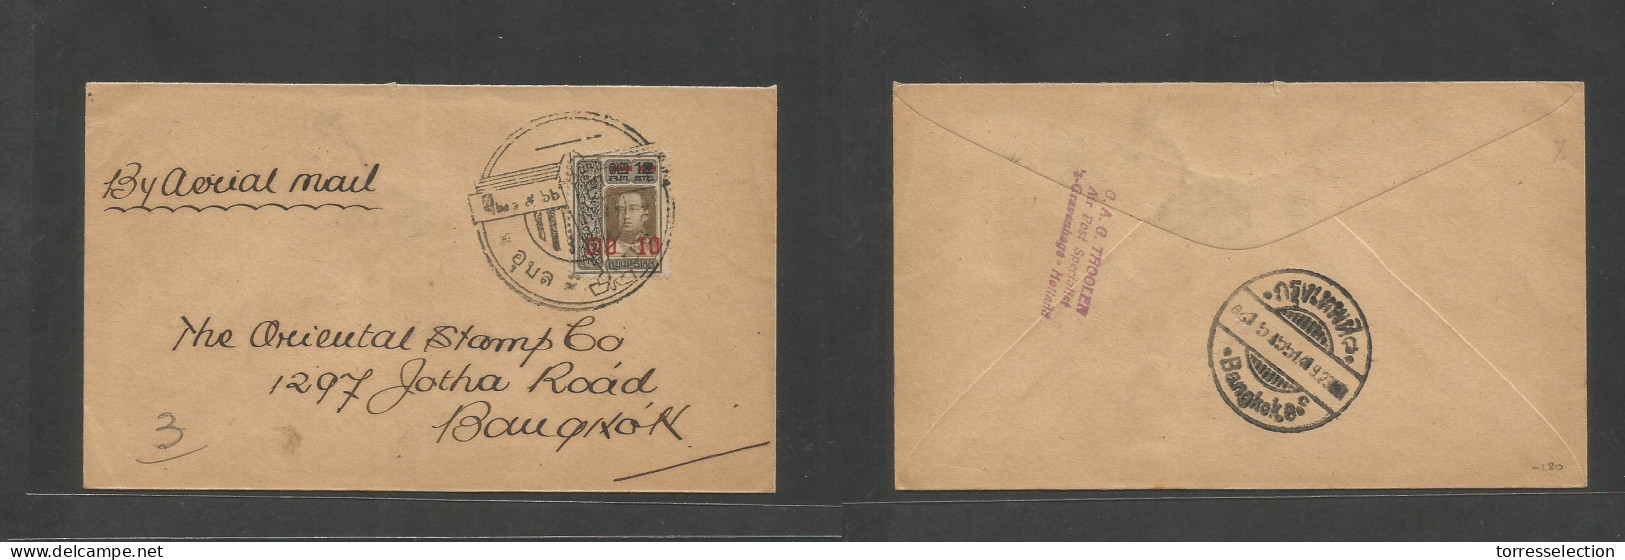 SIAM. 1923 (Sept) Special Flight. Fkd Envelope Comm, Used To Bangkok. Arrival Cachet Ovptd Issue. Fine. - Siam